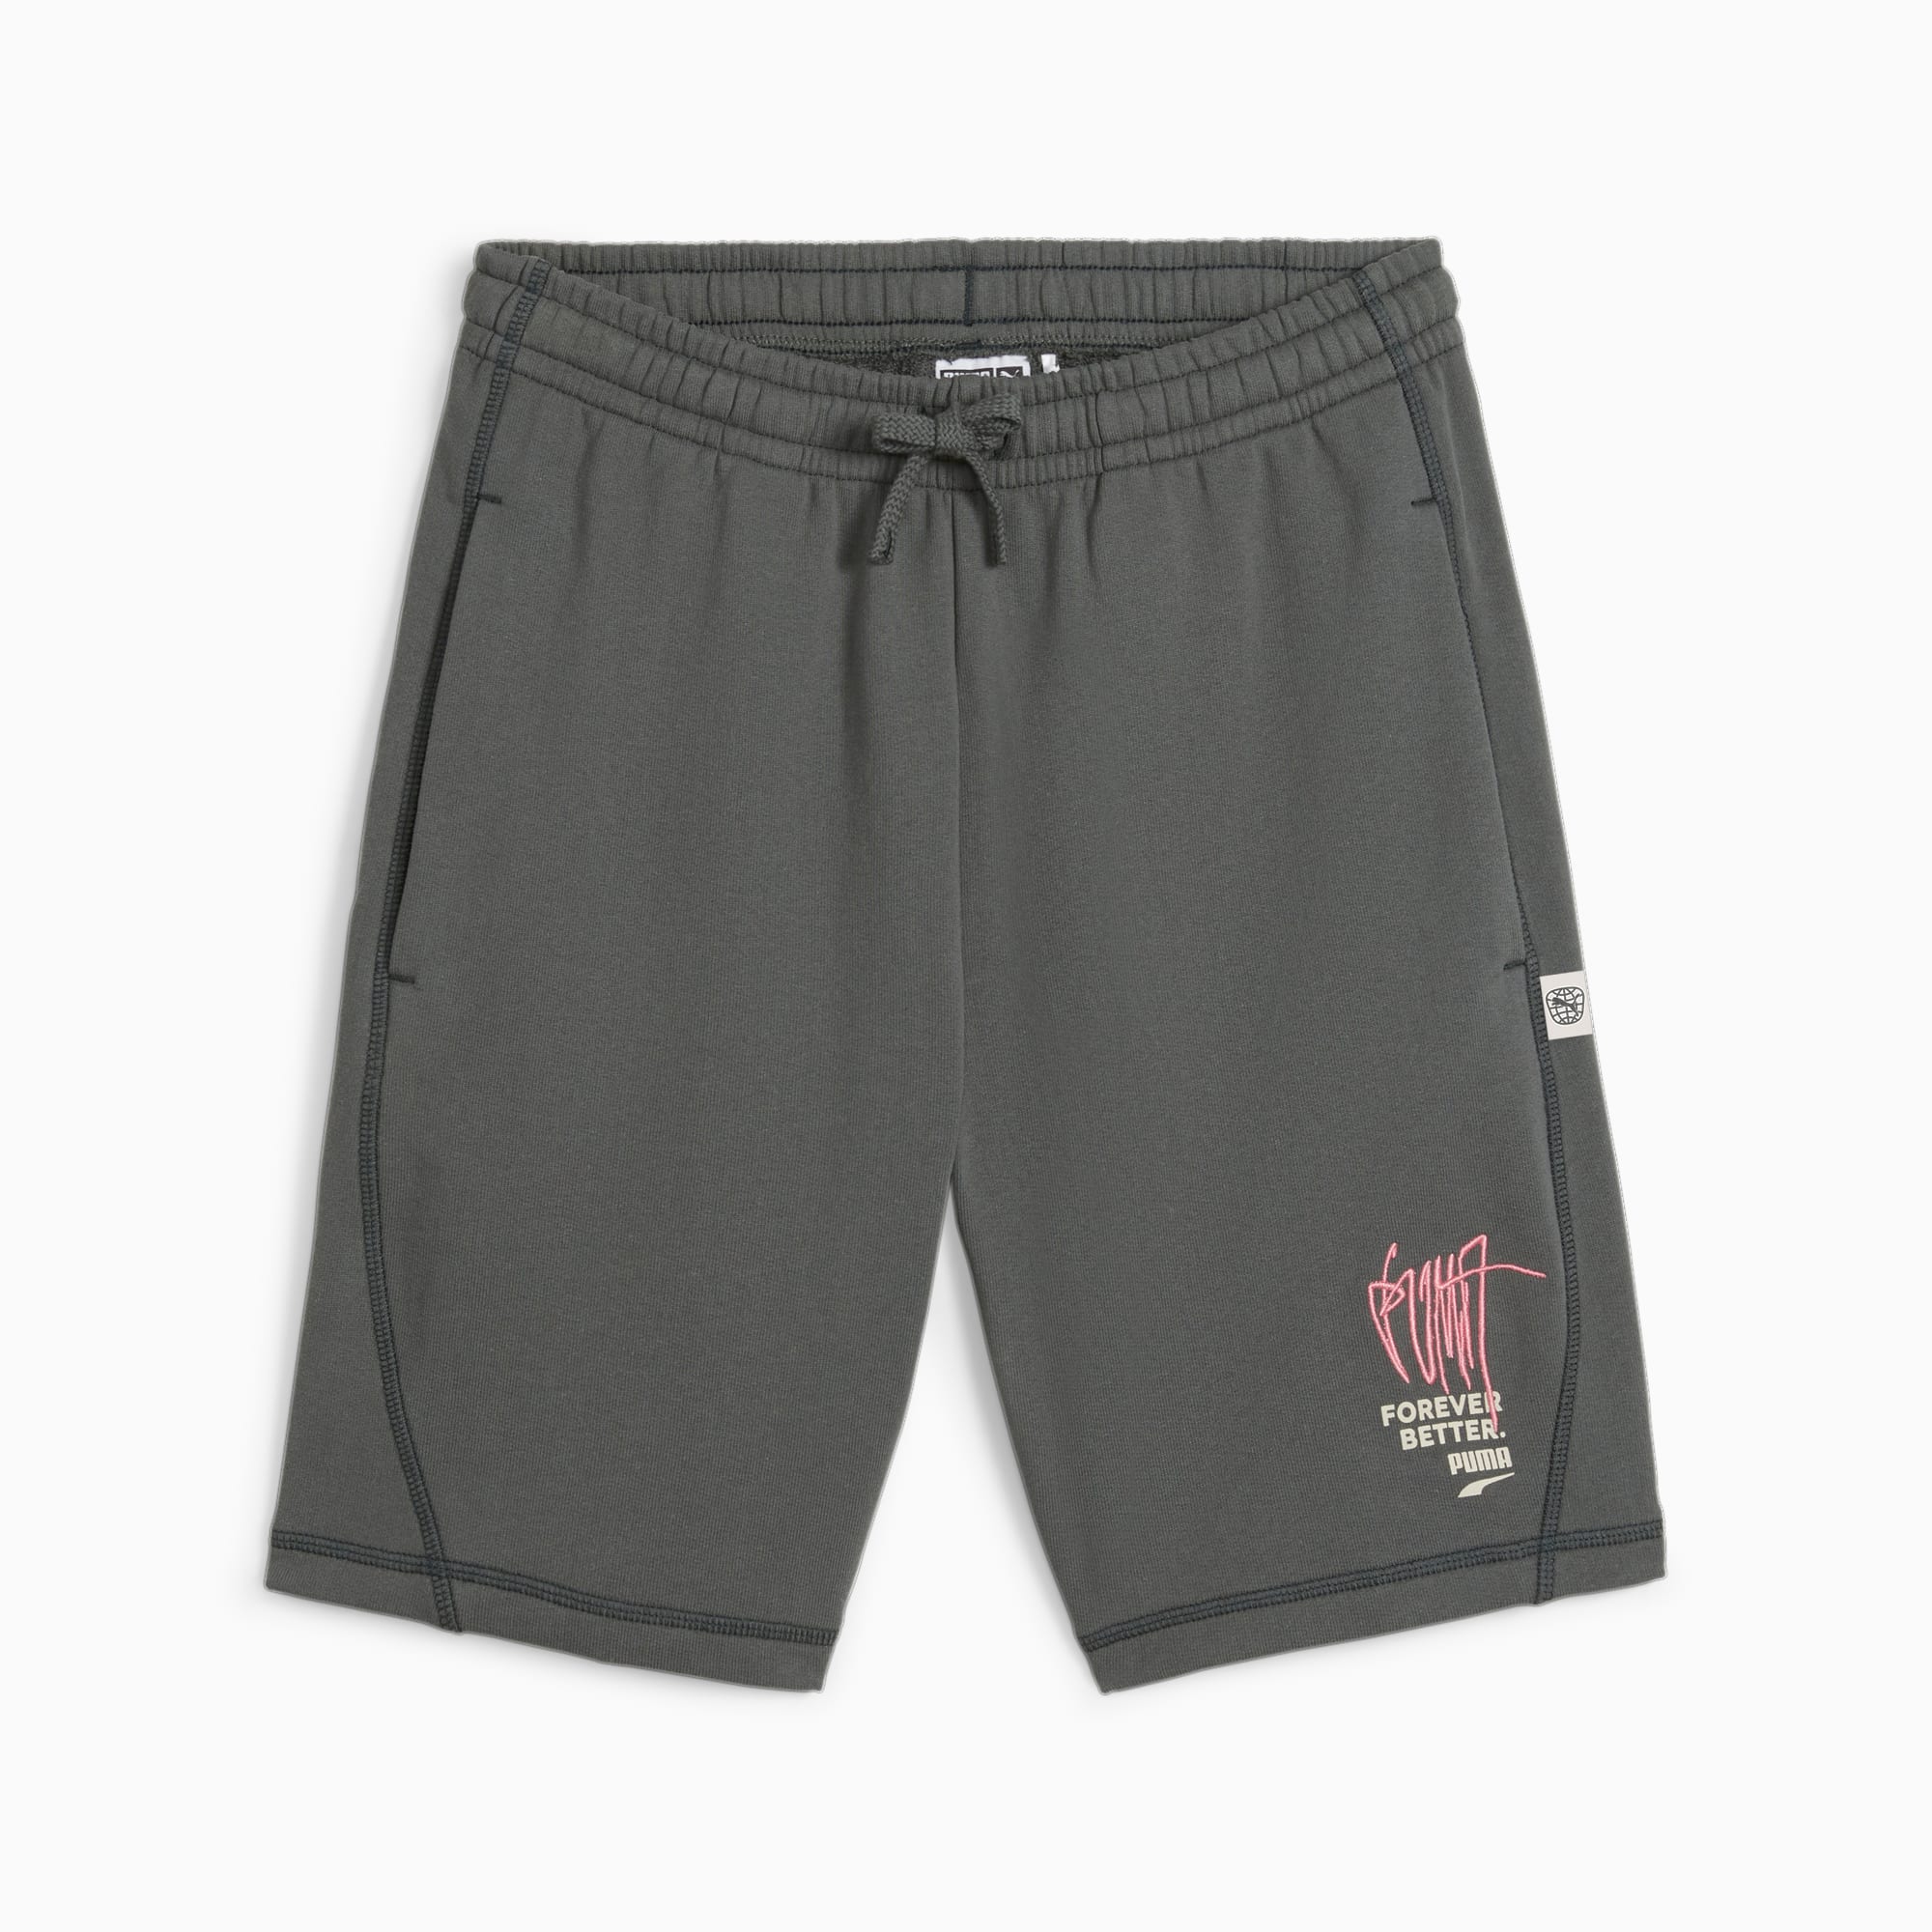 DOWNTOWN RE:COLLECTION Men's Shorts